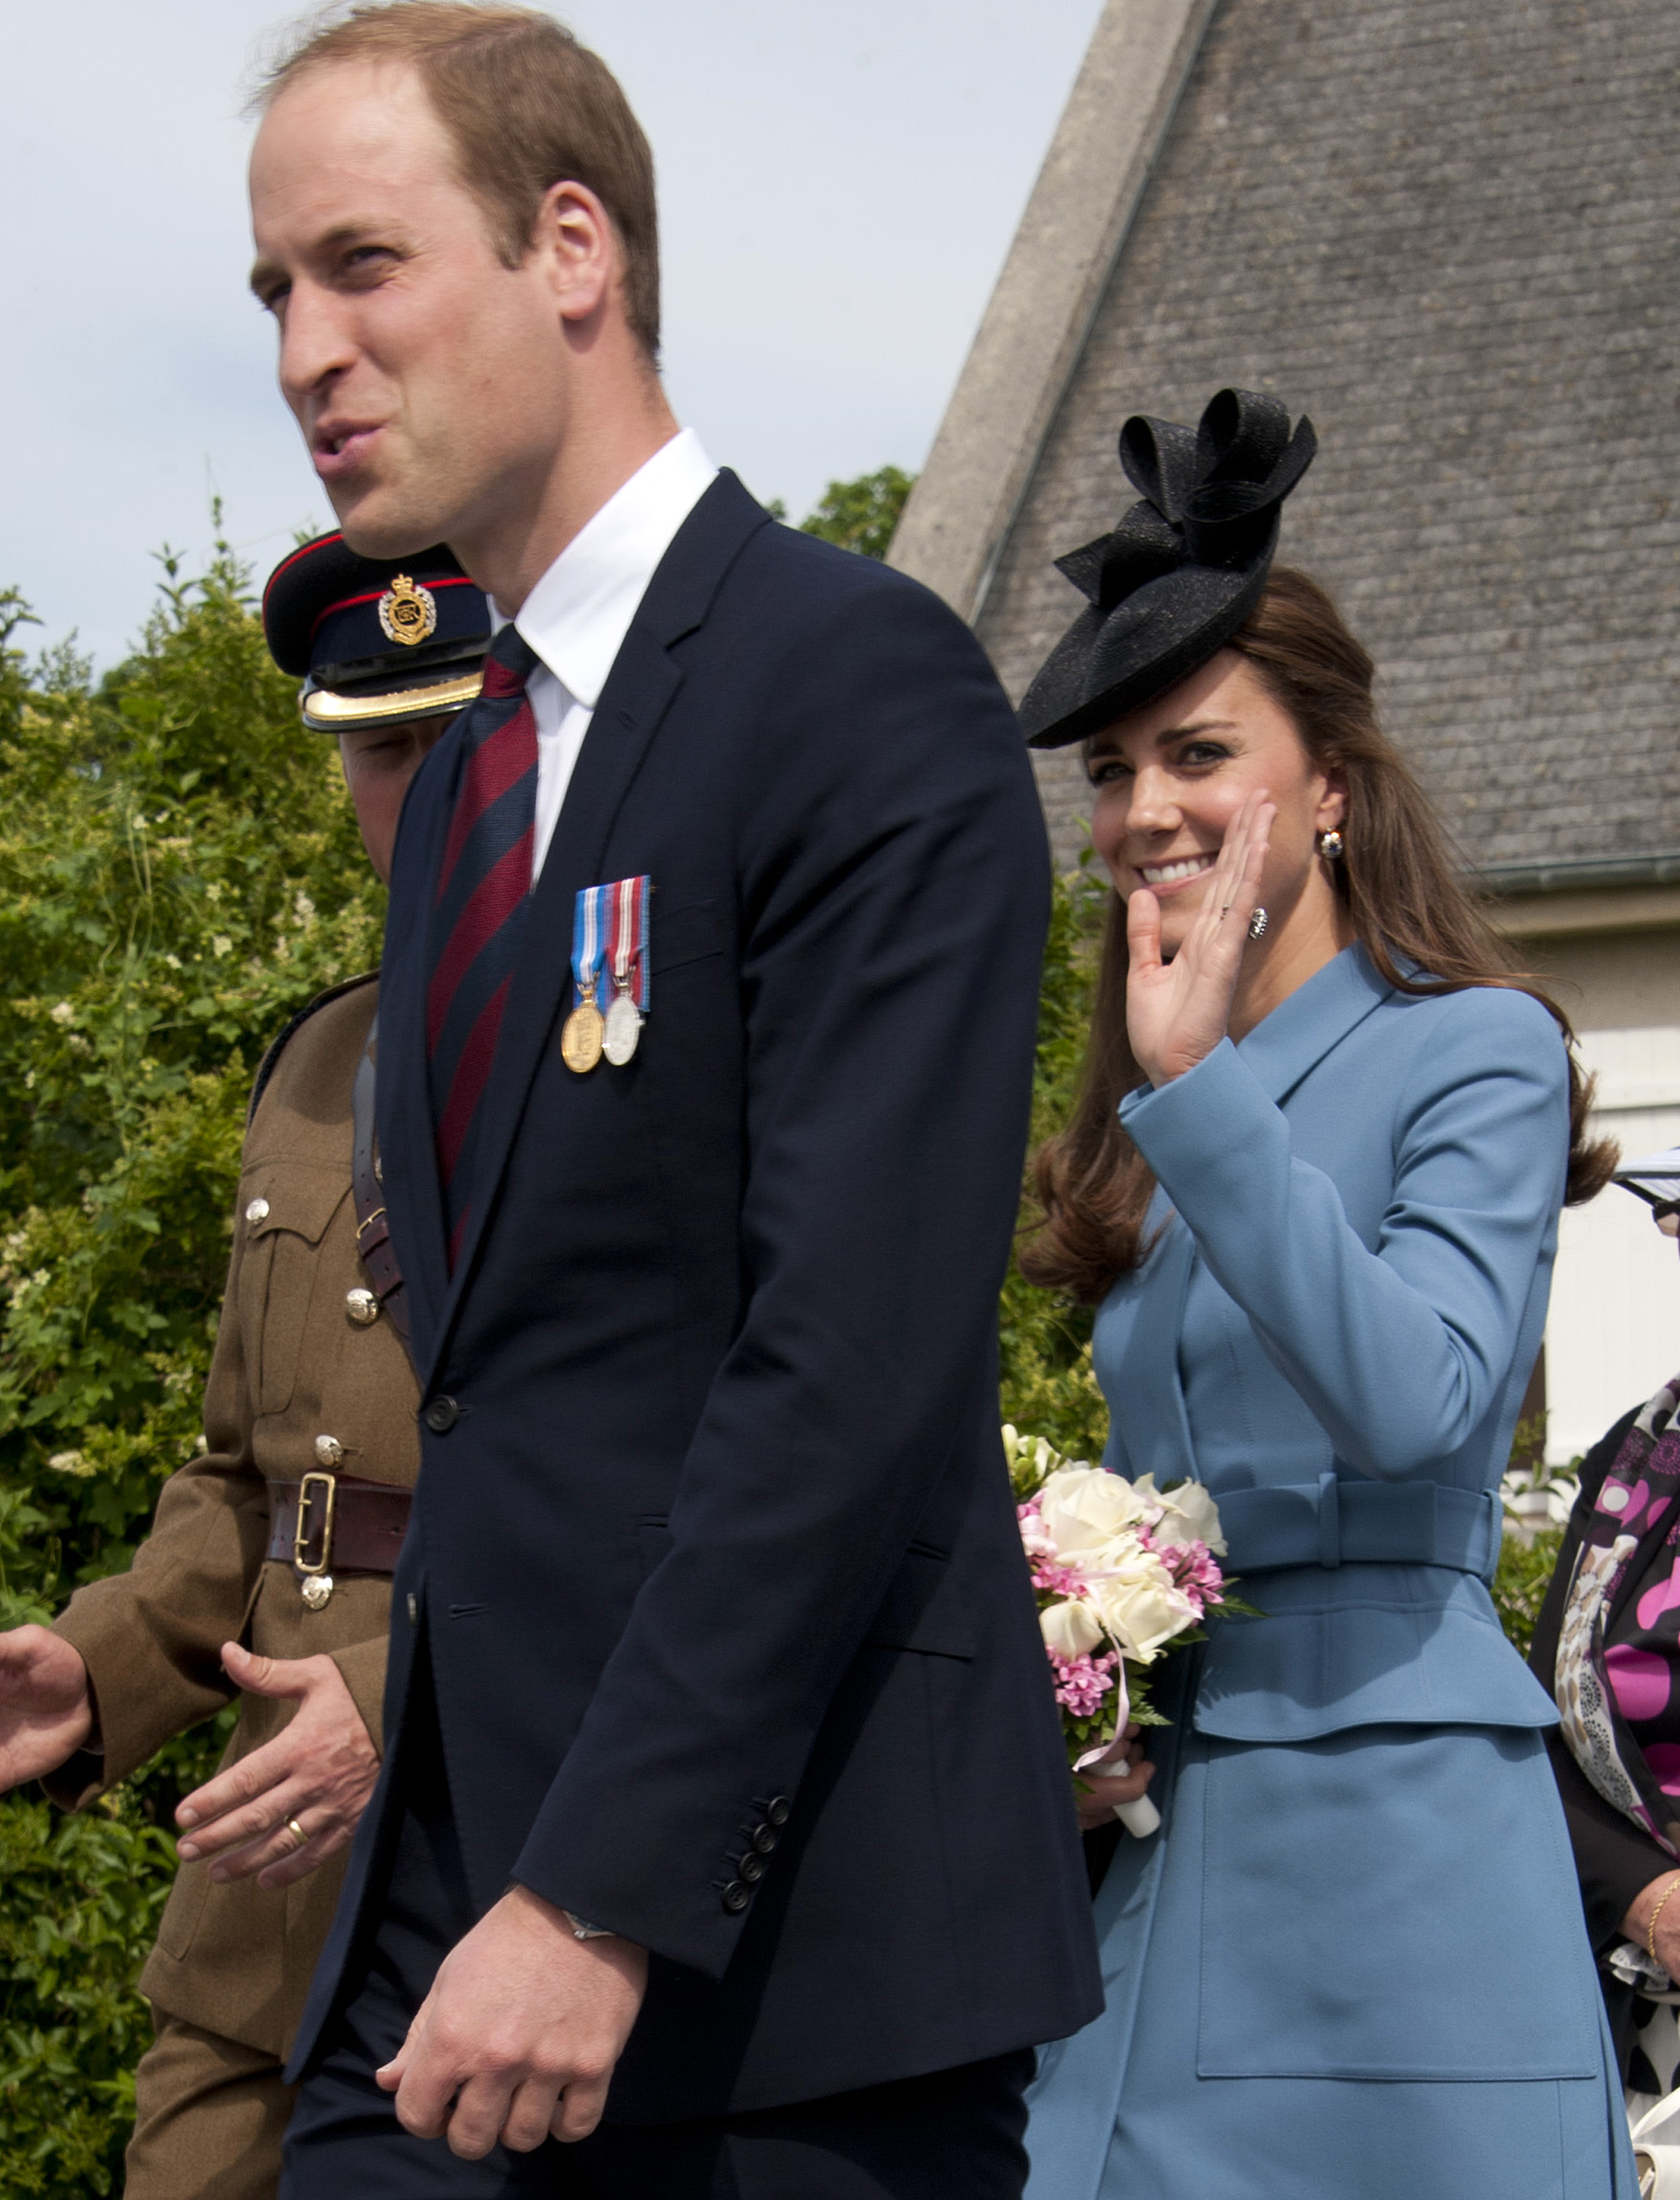 Prince-William-Kate-Middleton-D-Day-Anniversary (4)